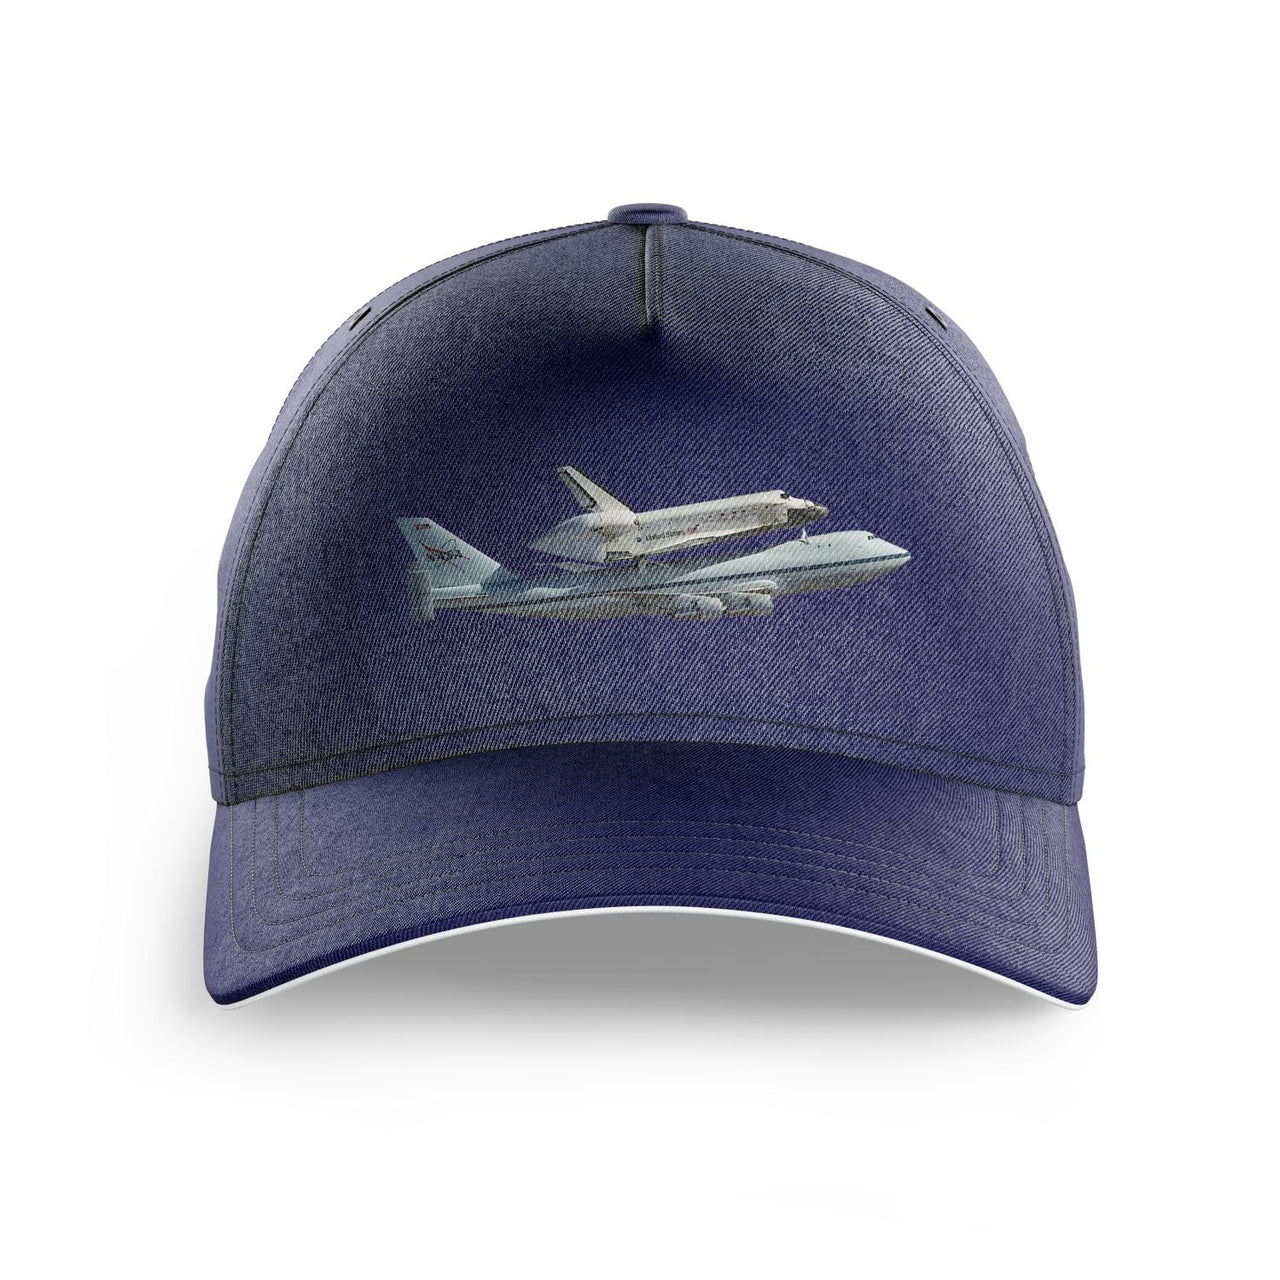 Space shuttle on 747 Printed Hats